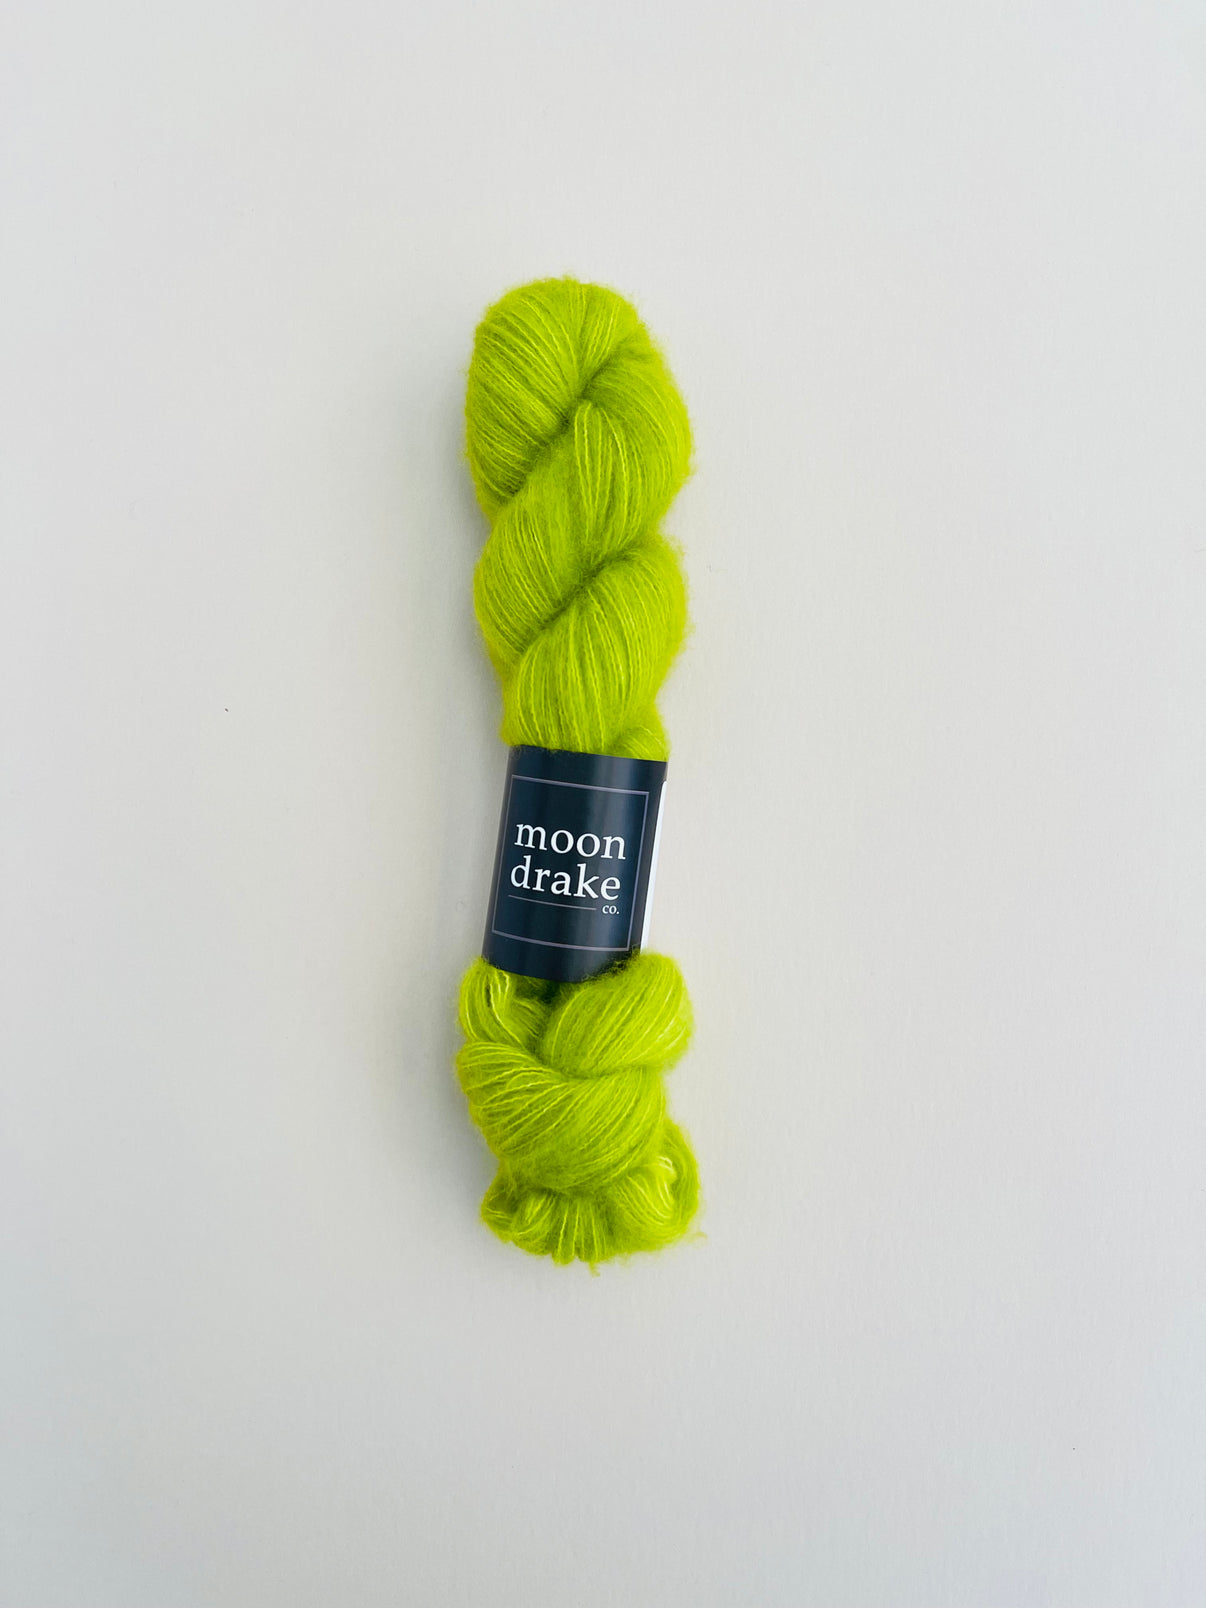 A skein of lime green yarn with a fuzzy halo.